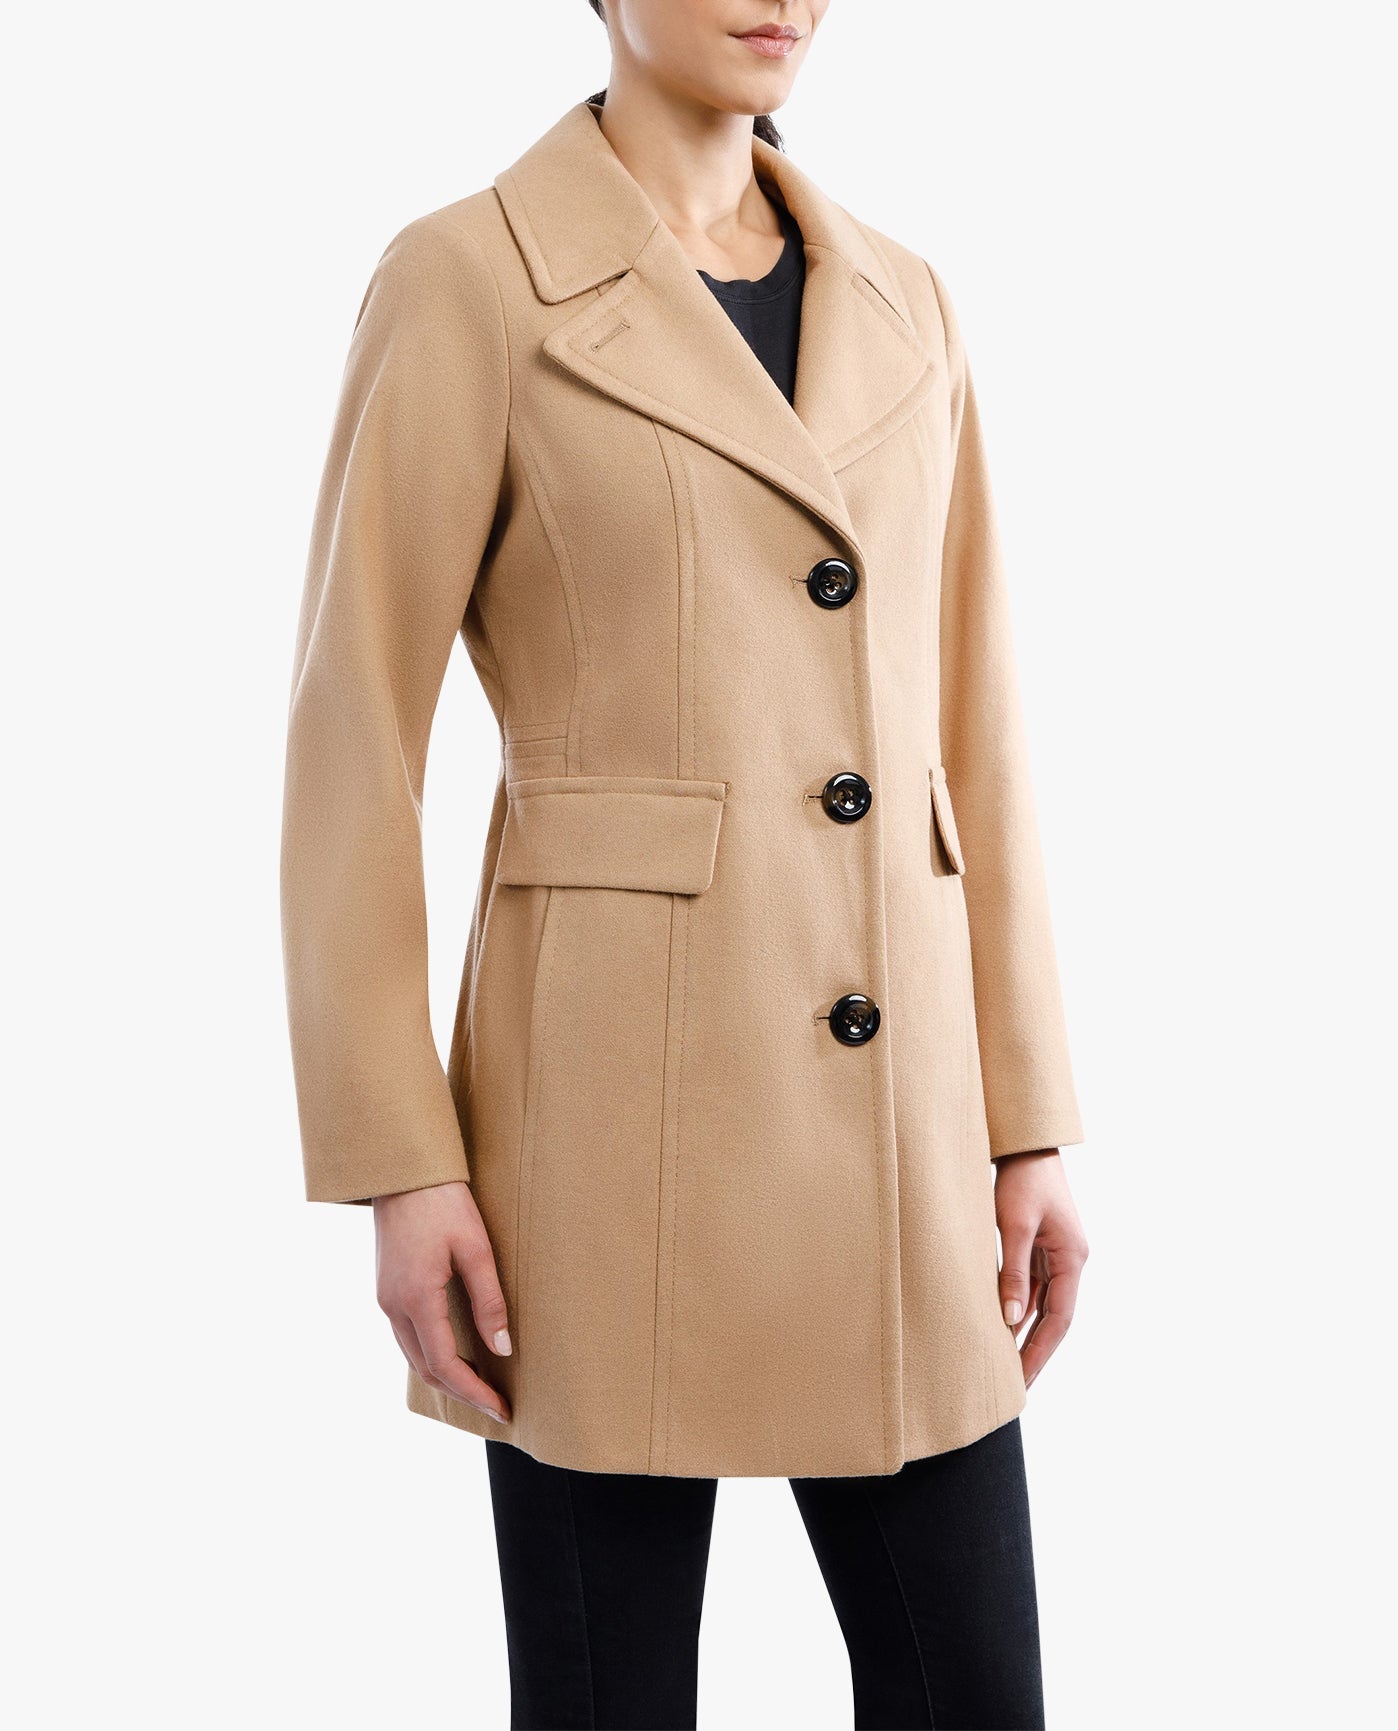 Alt View Of SINGLE BREASTED PEACOAT | CAMEL